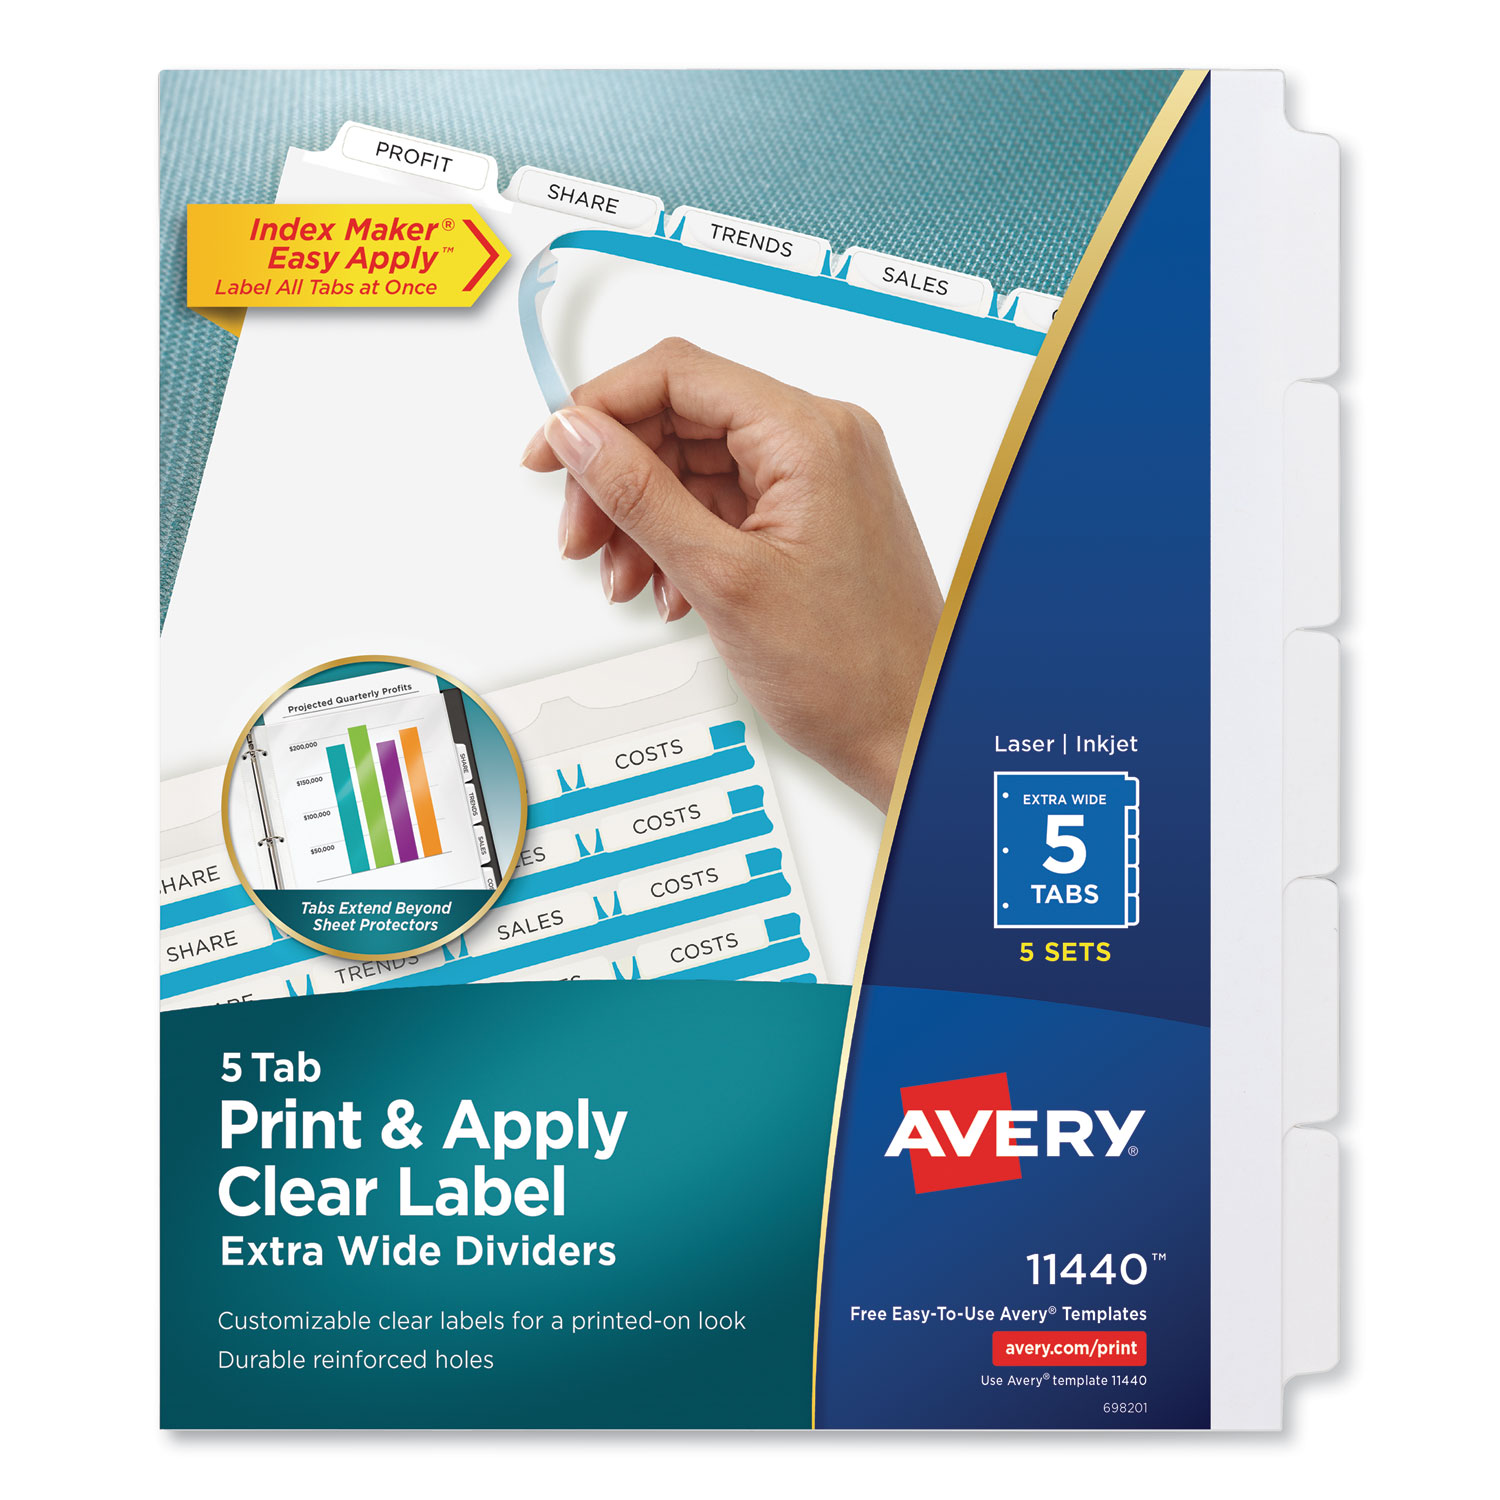  Avery 11440 Print and Apply Index Maker Clear Label Dividers, 5 White Tabs, Letter, 5 Sets (AVE11440) 